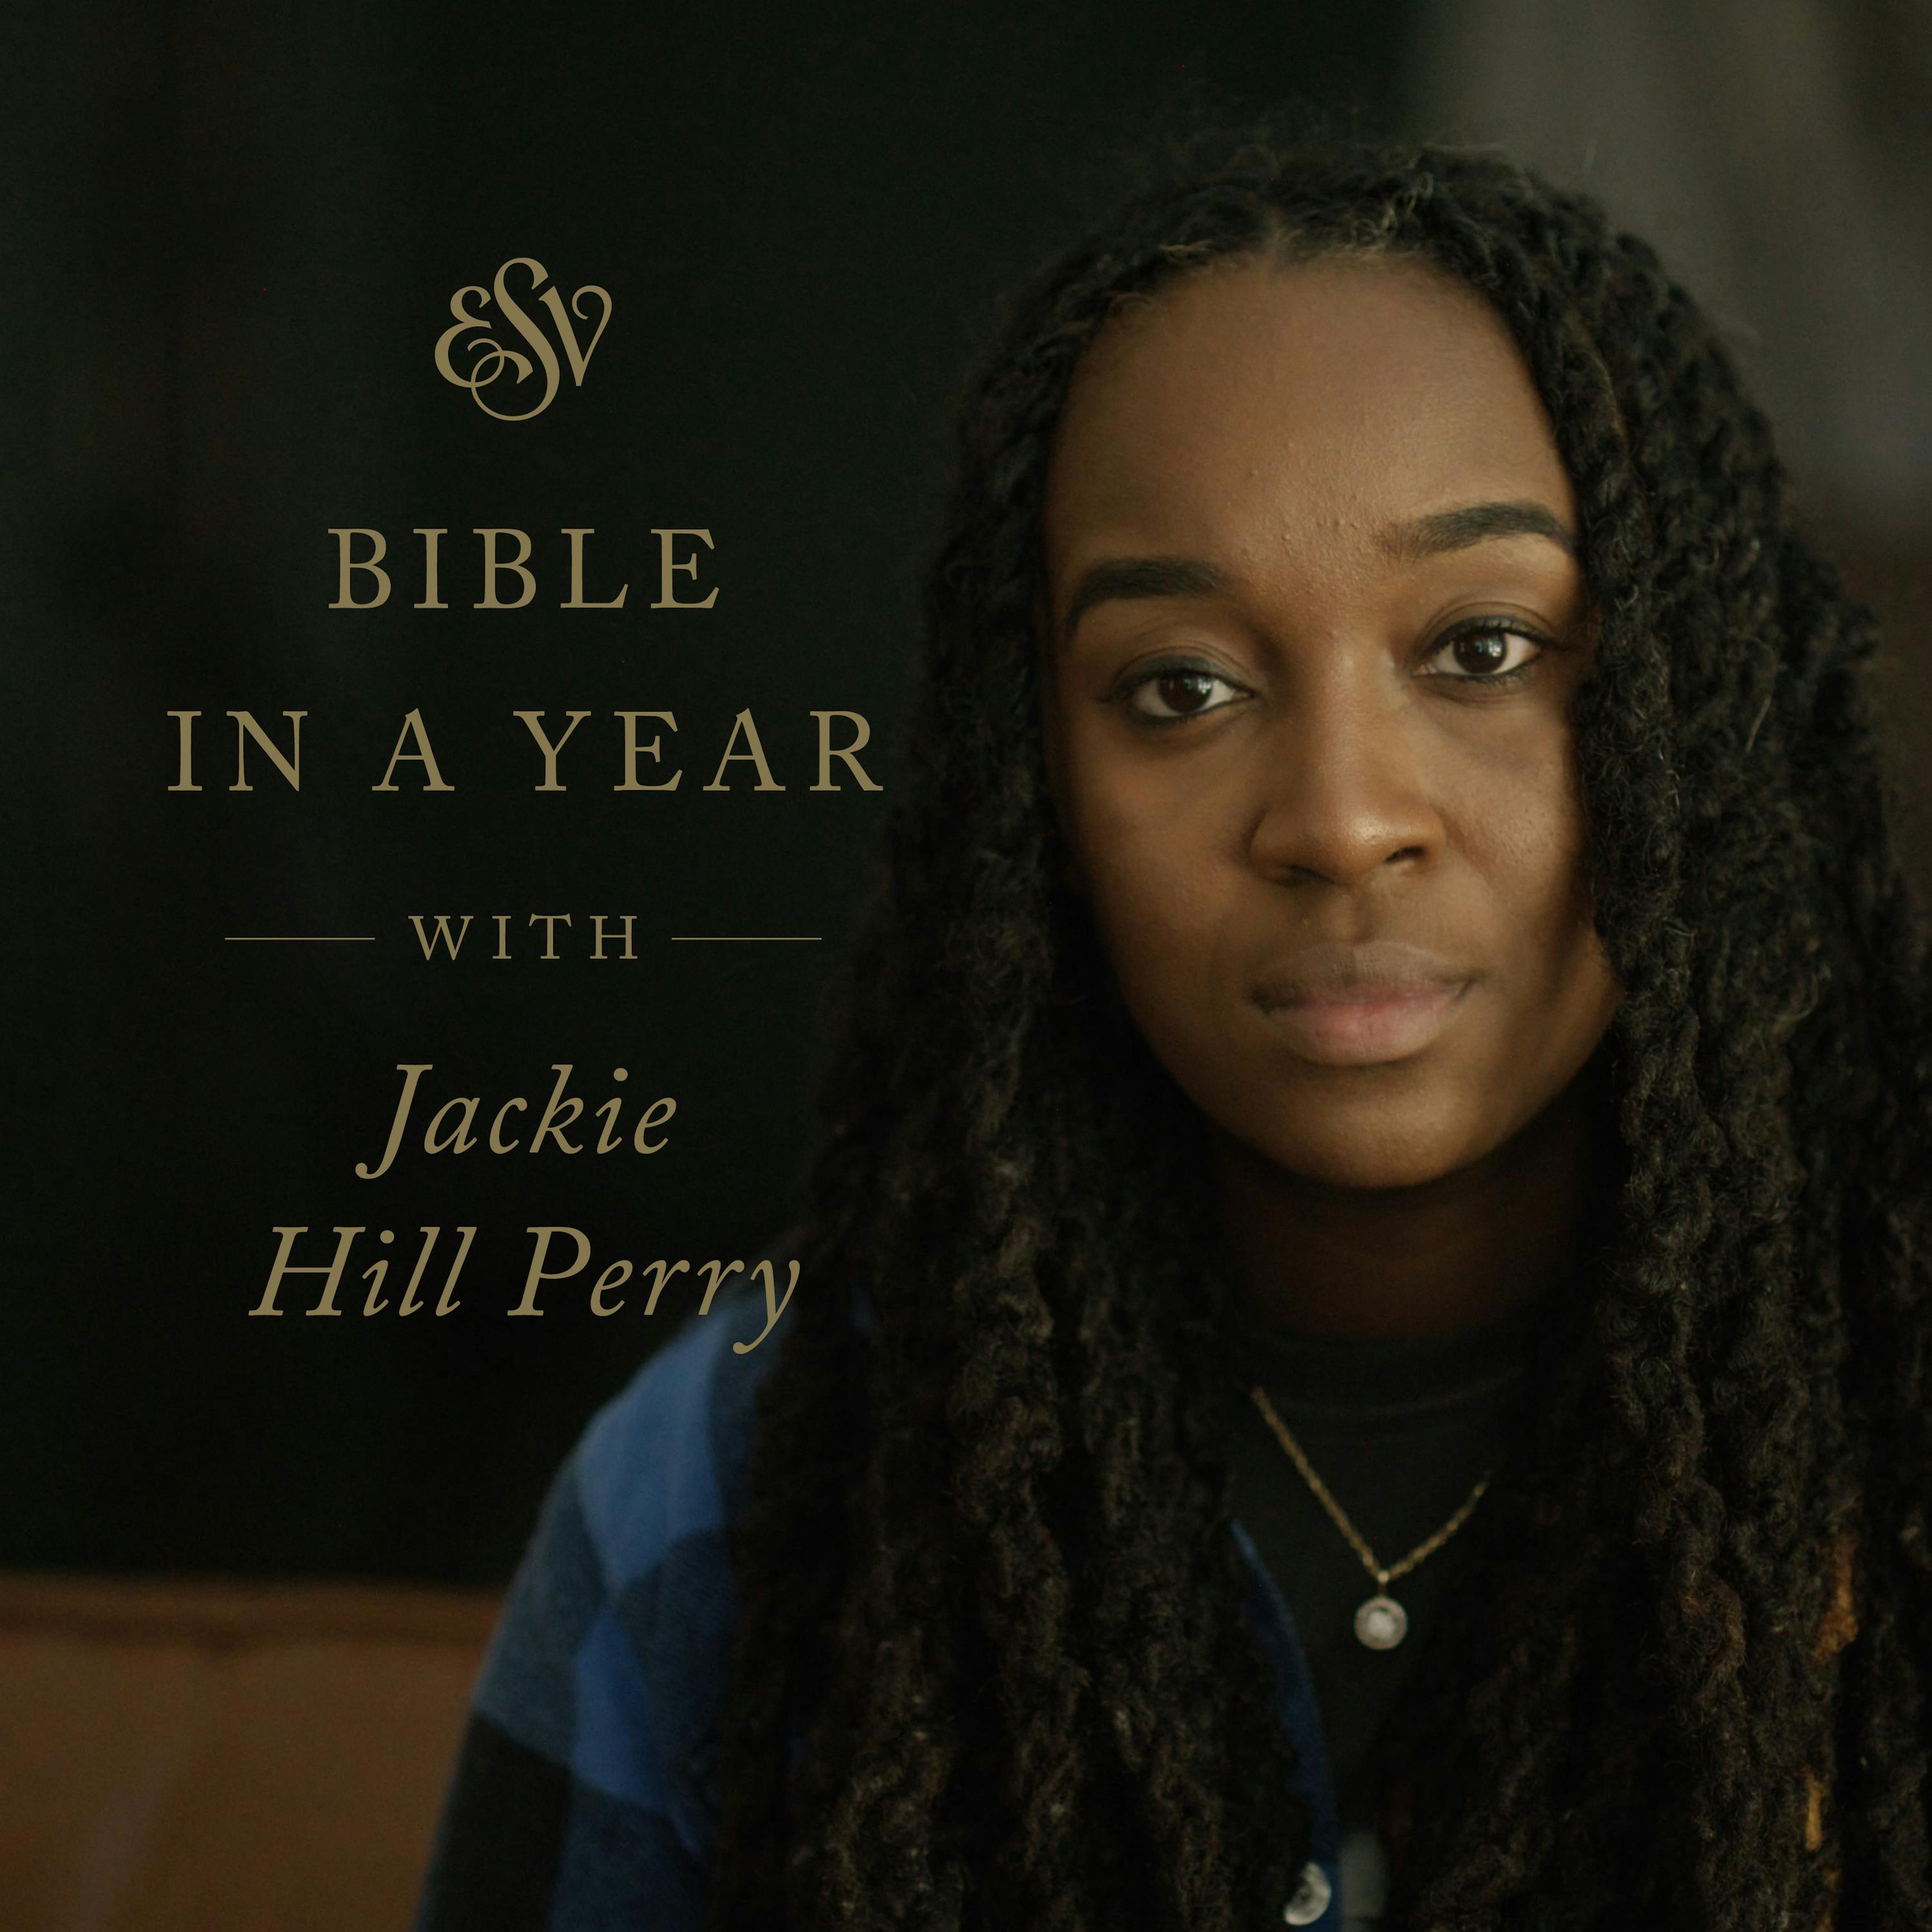 Through the ESV Bible in a Year with Jackie Hill Perry